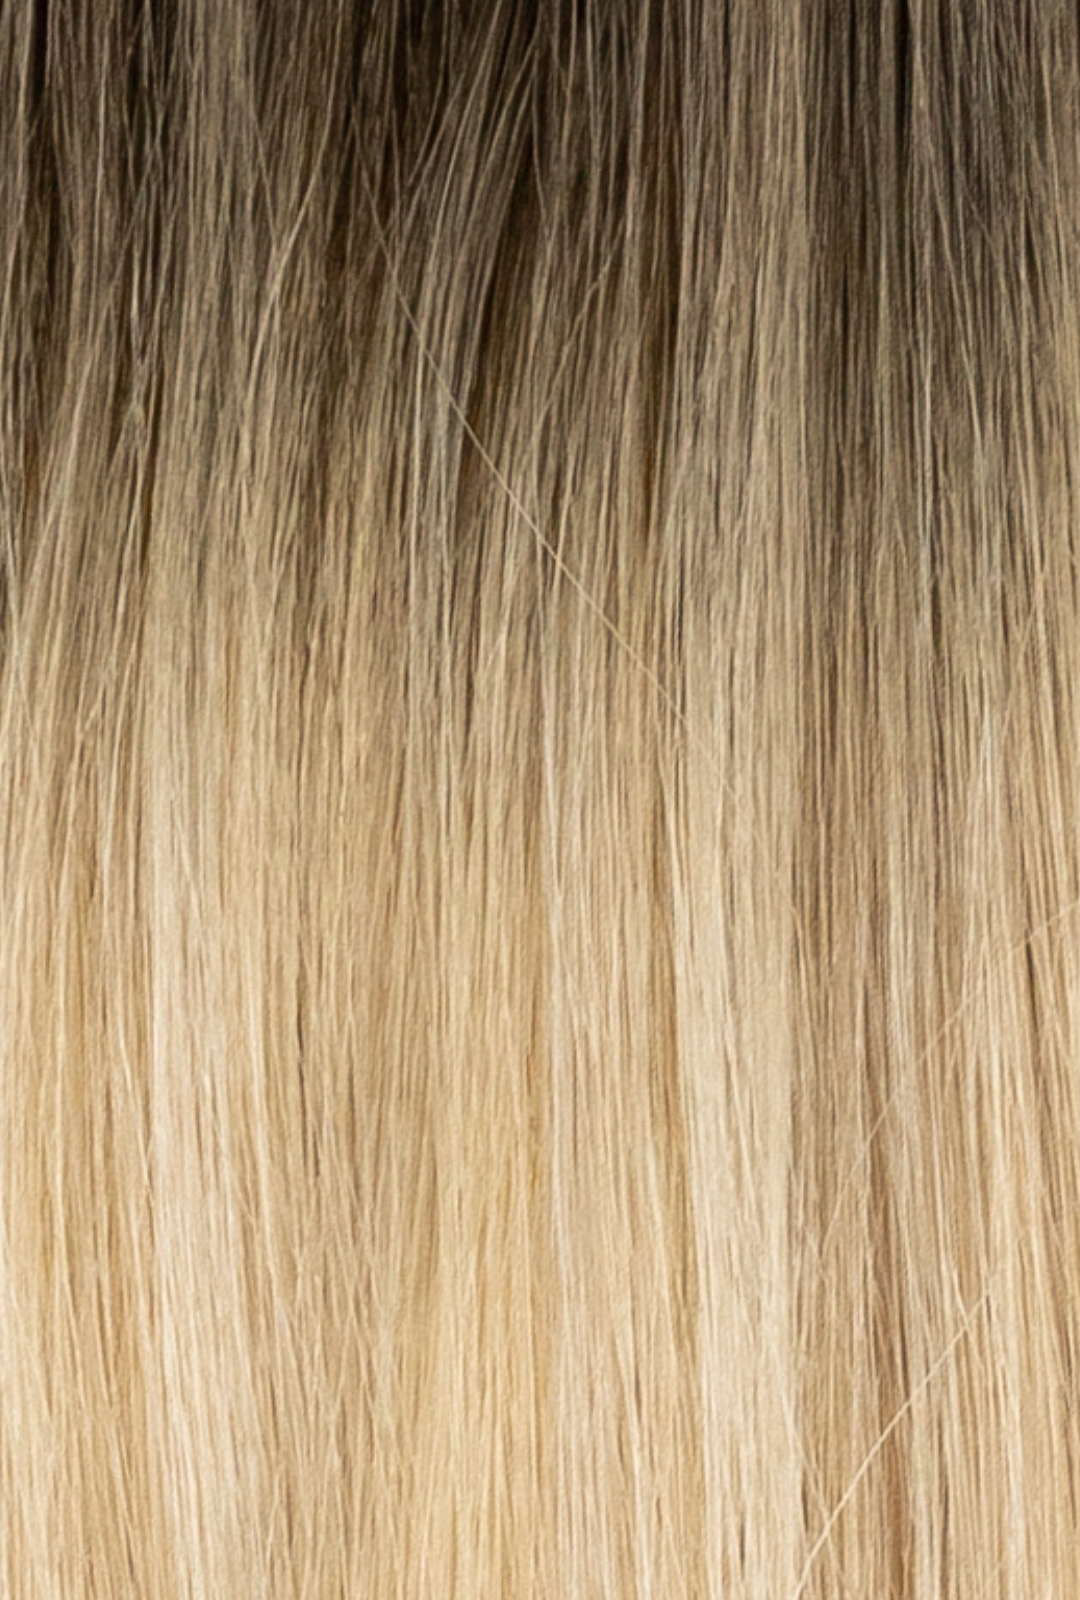 Beachwashed X Laced Hair Hand Tied Weft Extensions - Surf